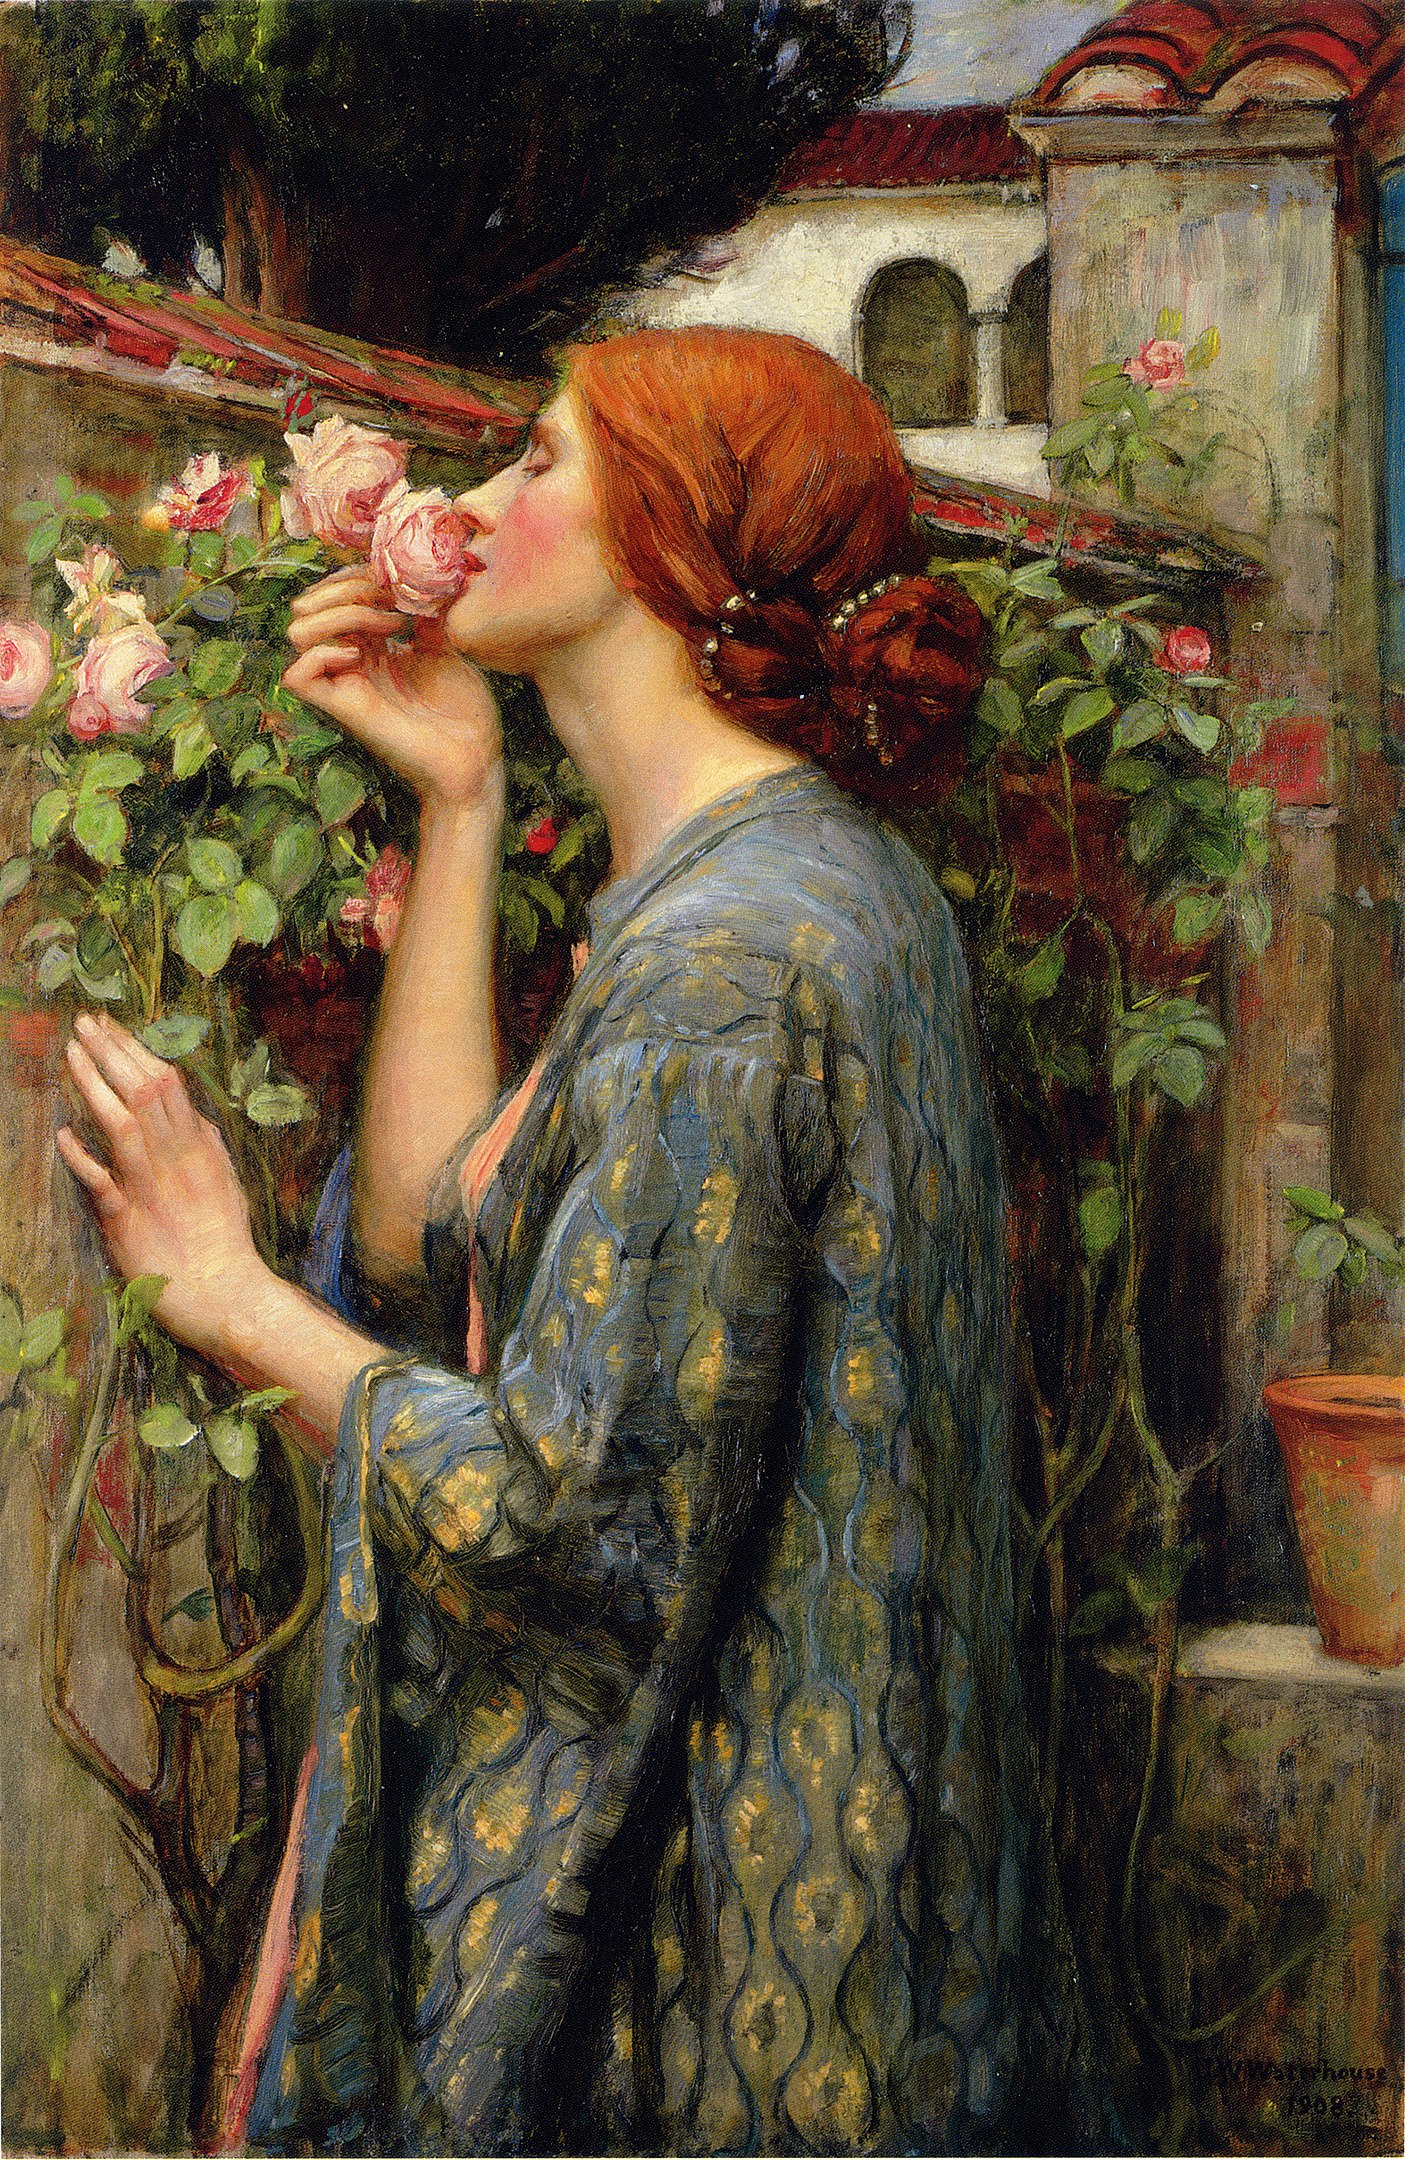 A woman smelling roses growing along a wall outdoors